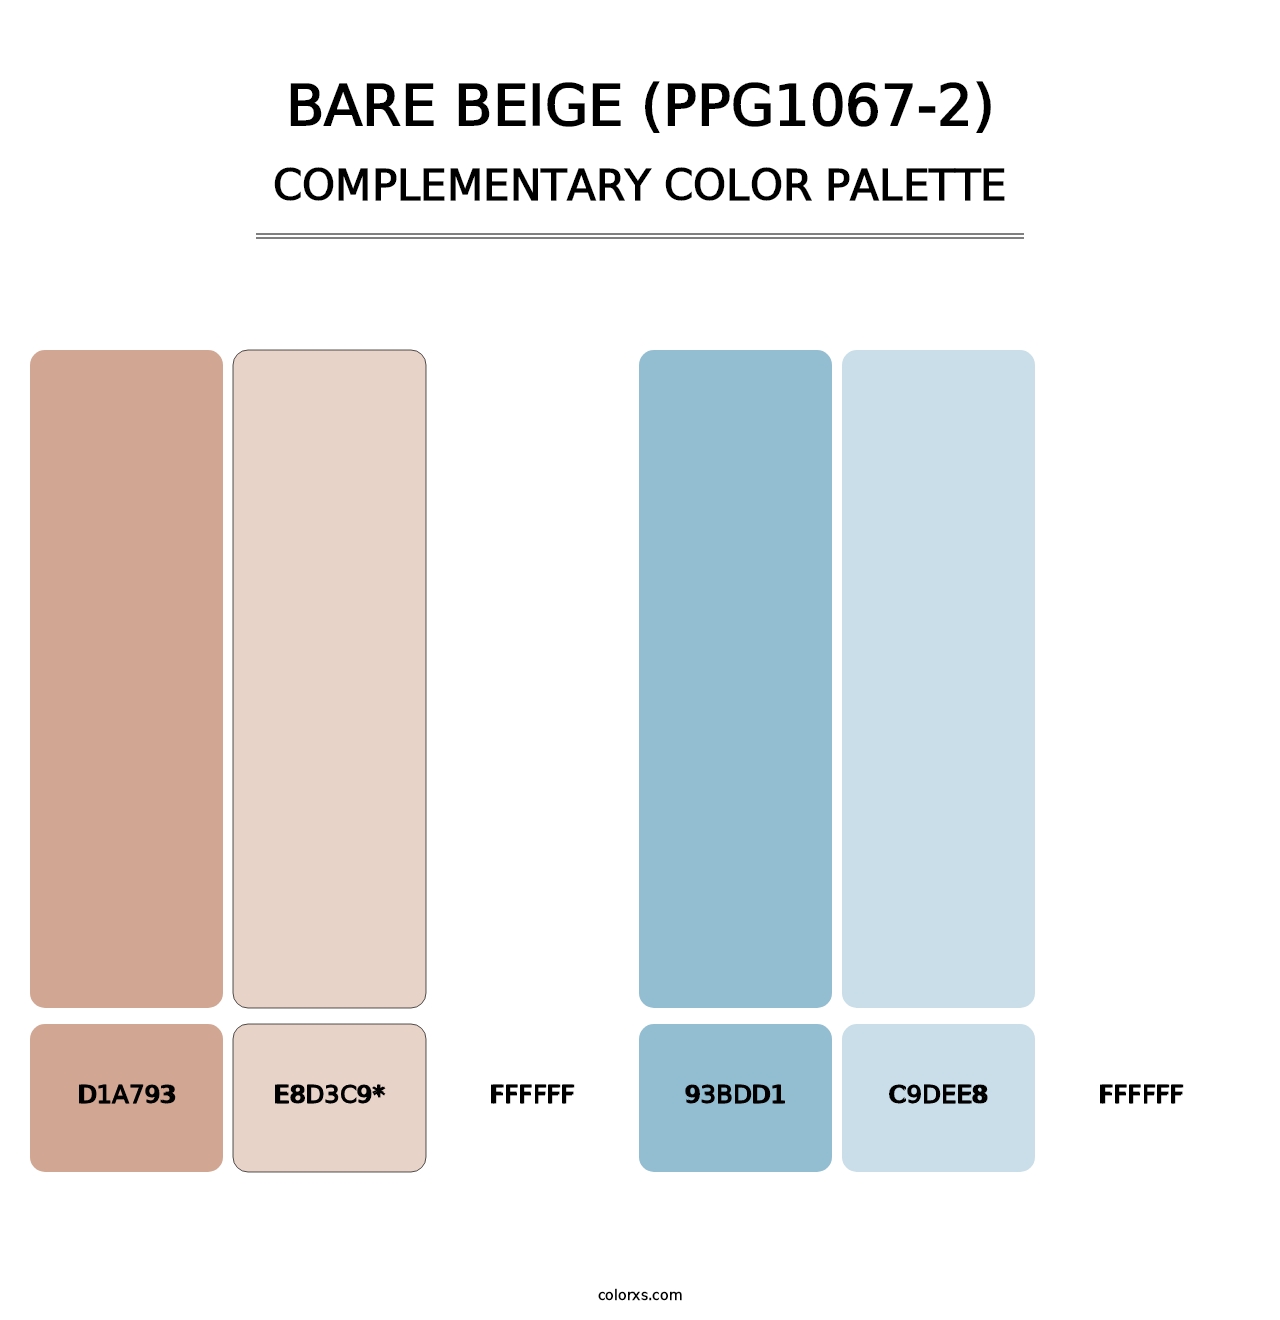 Bare Beige (PPG1067-2) - Complementary Color Palette